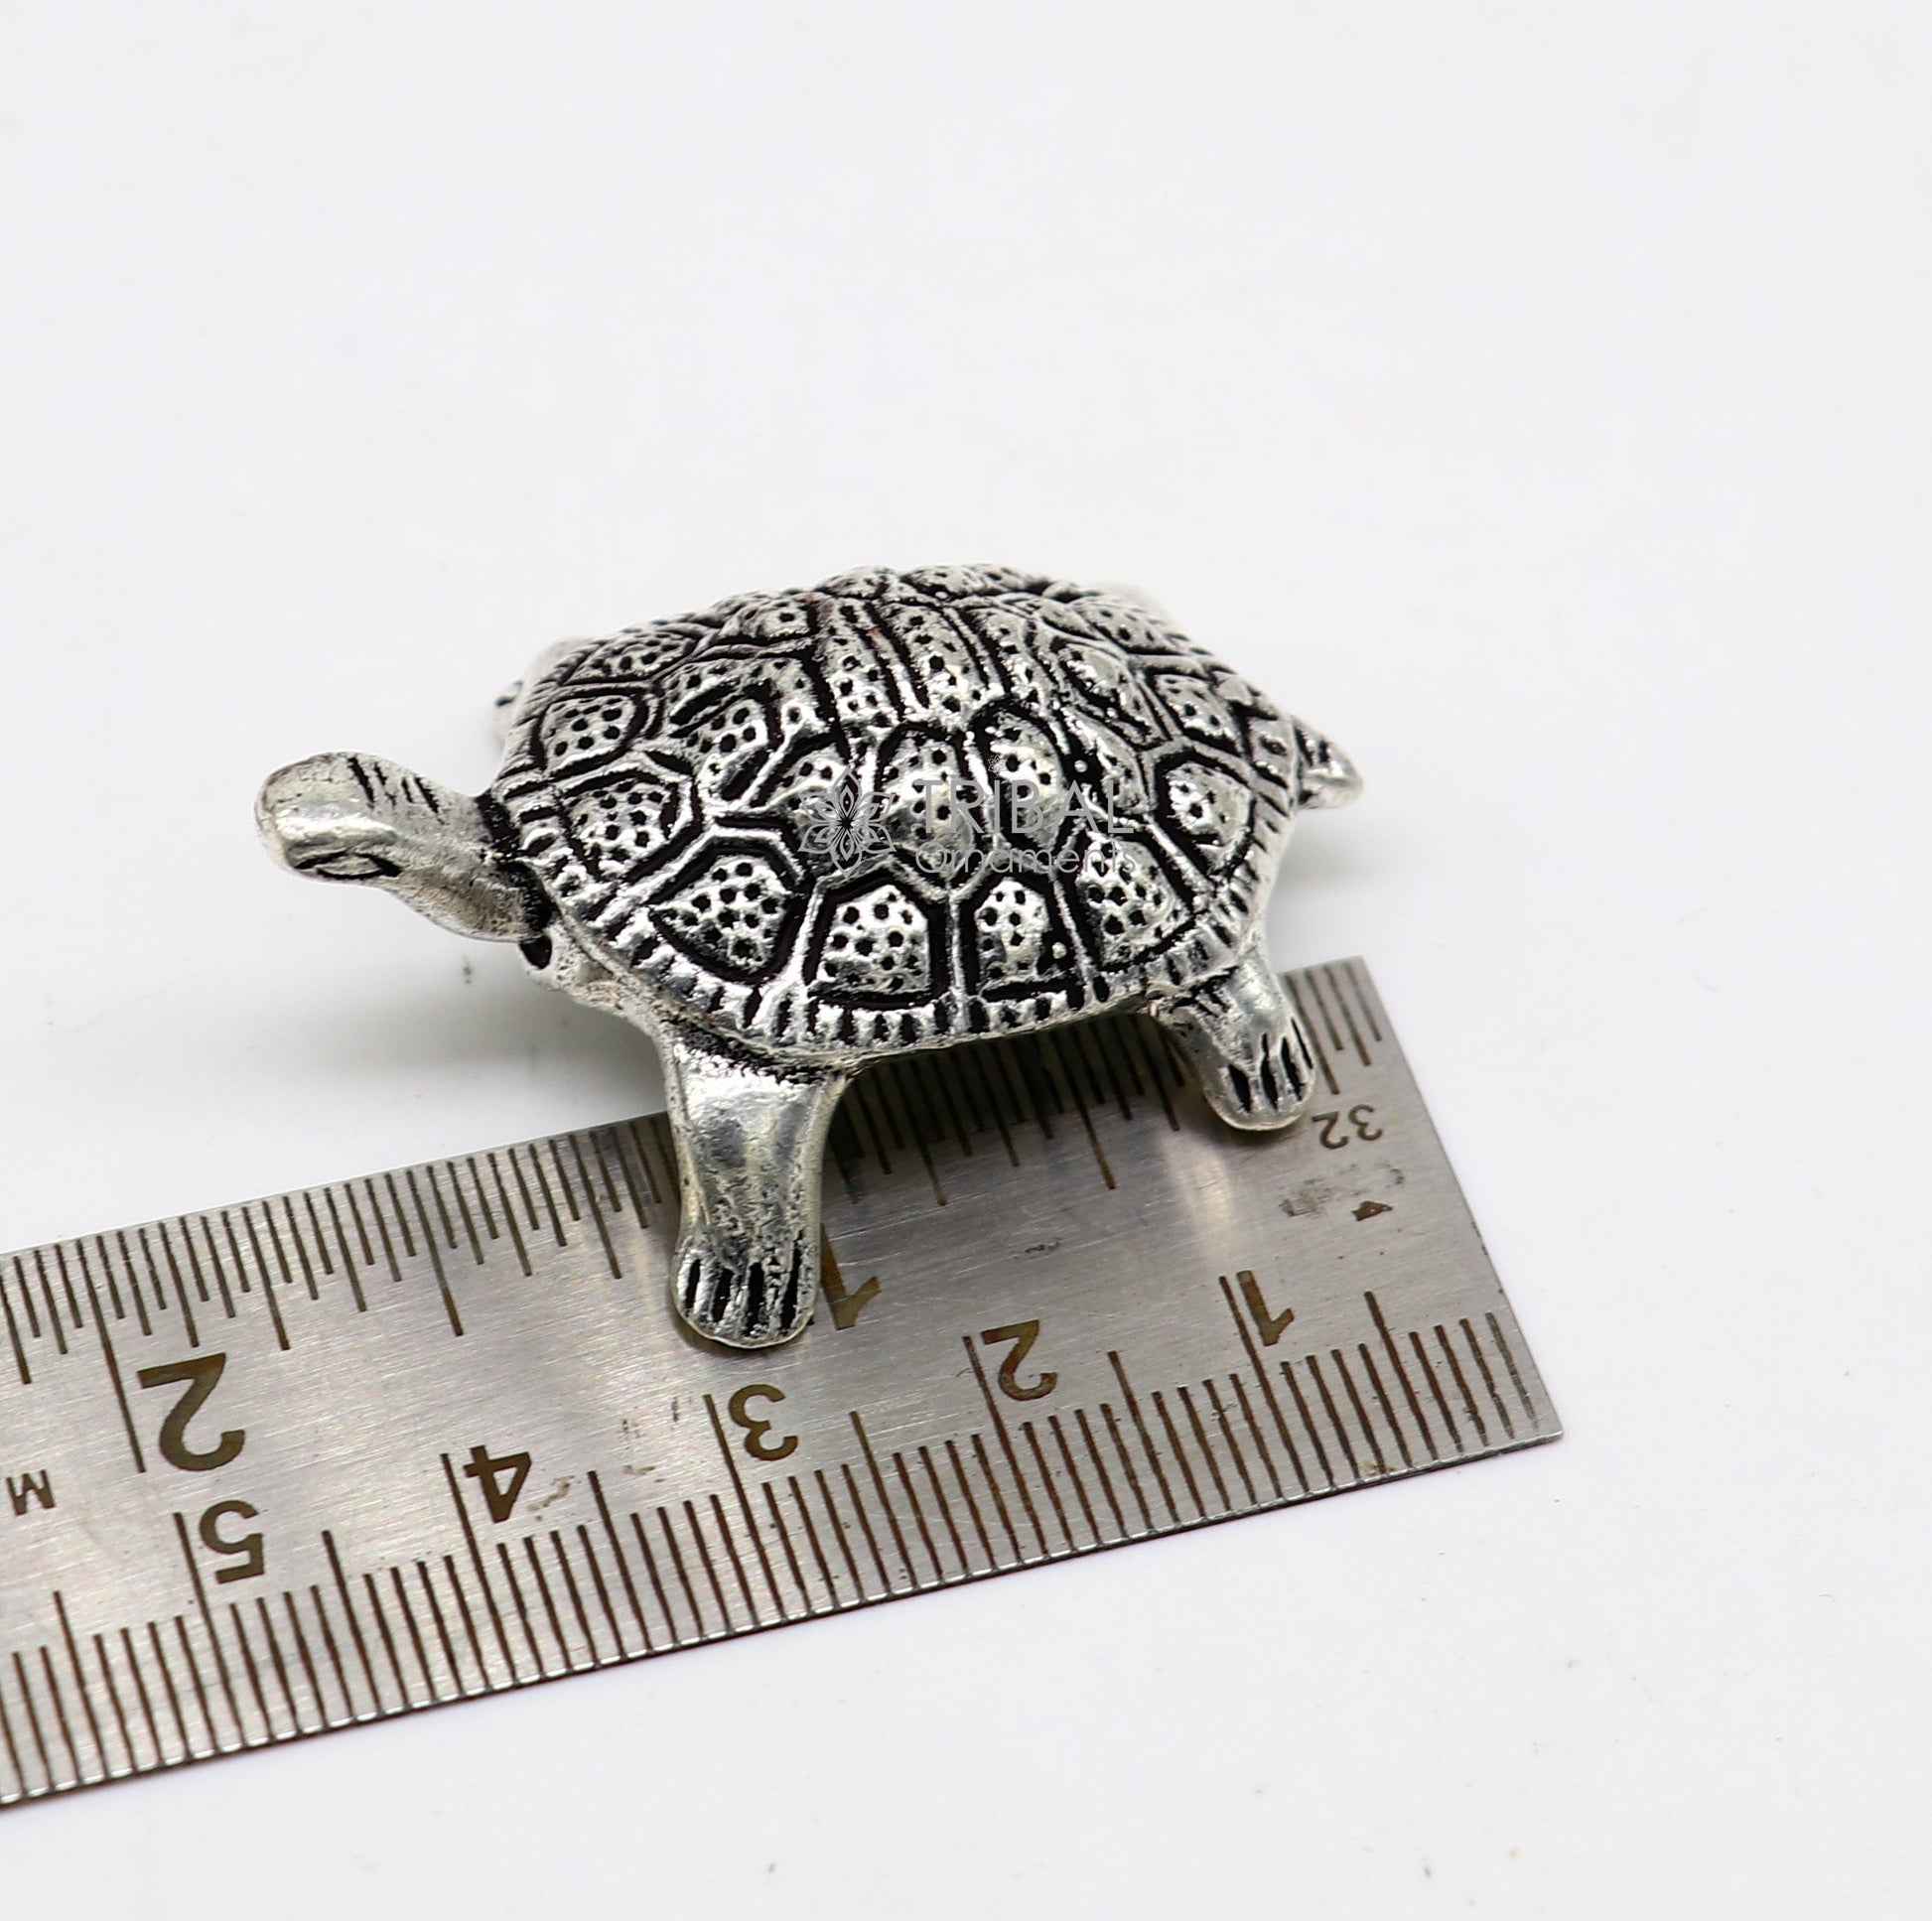 925 sterling silver Solid design small tortoise statue sculpture puja article collection silver figurine for wealth and prosperity art613 - TRIBAL ORNAMENTS